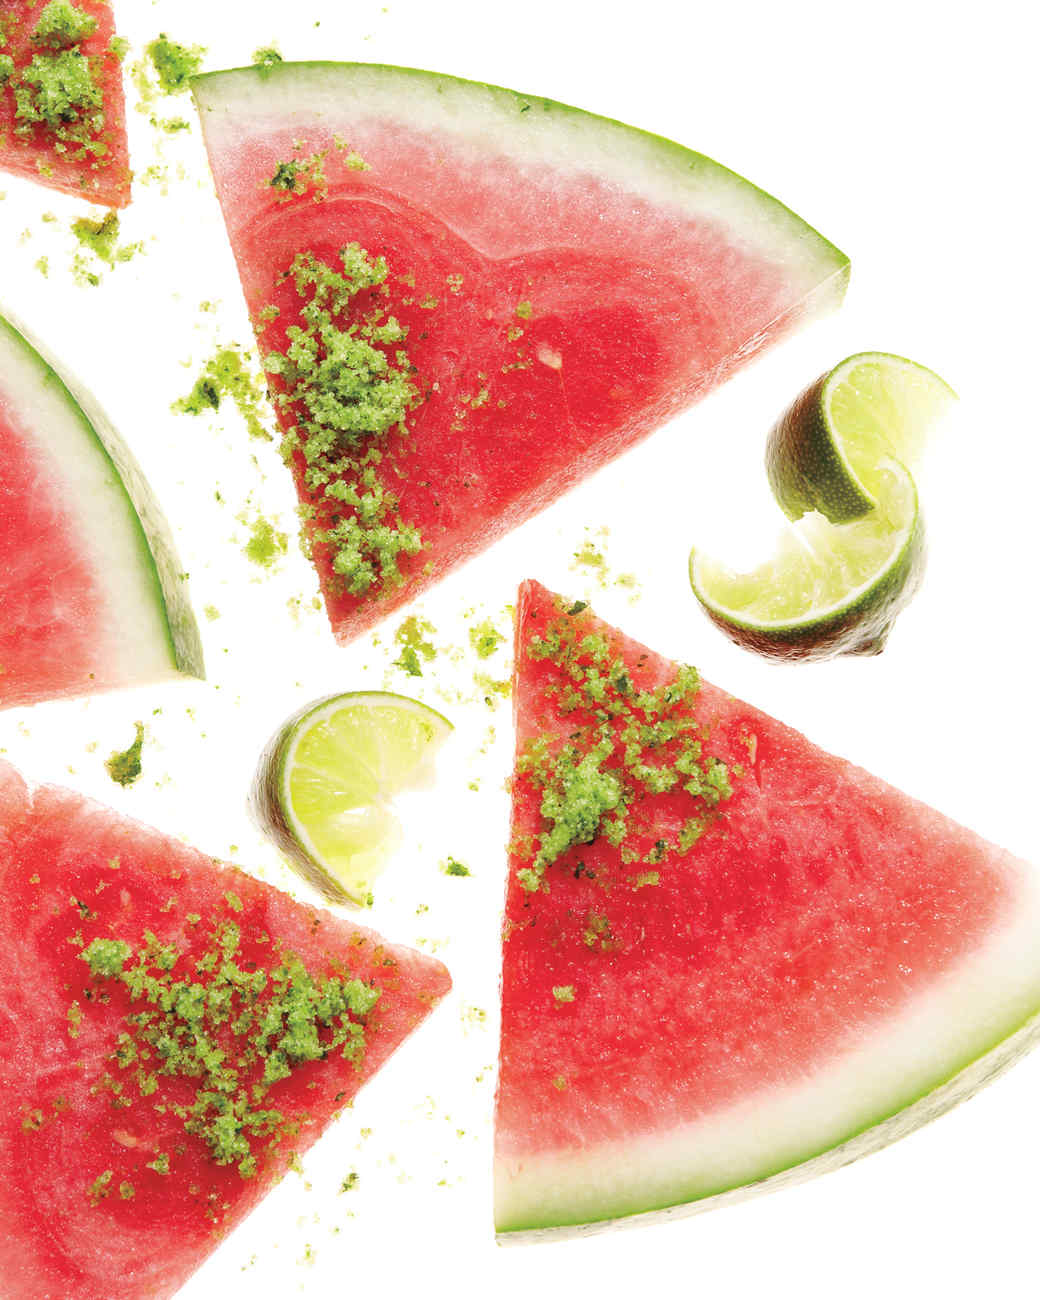 How long will a whole watermelon stay fresh?